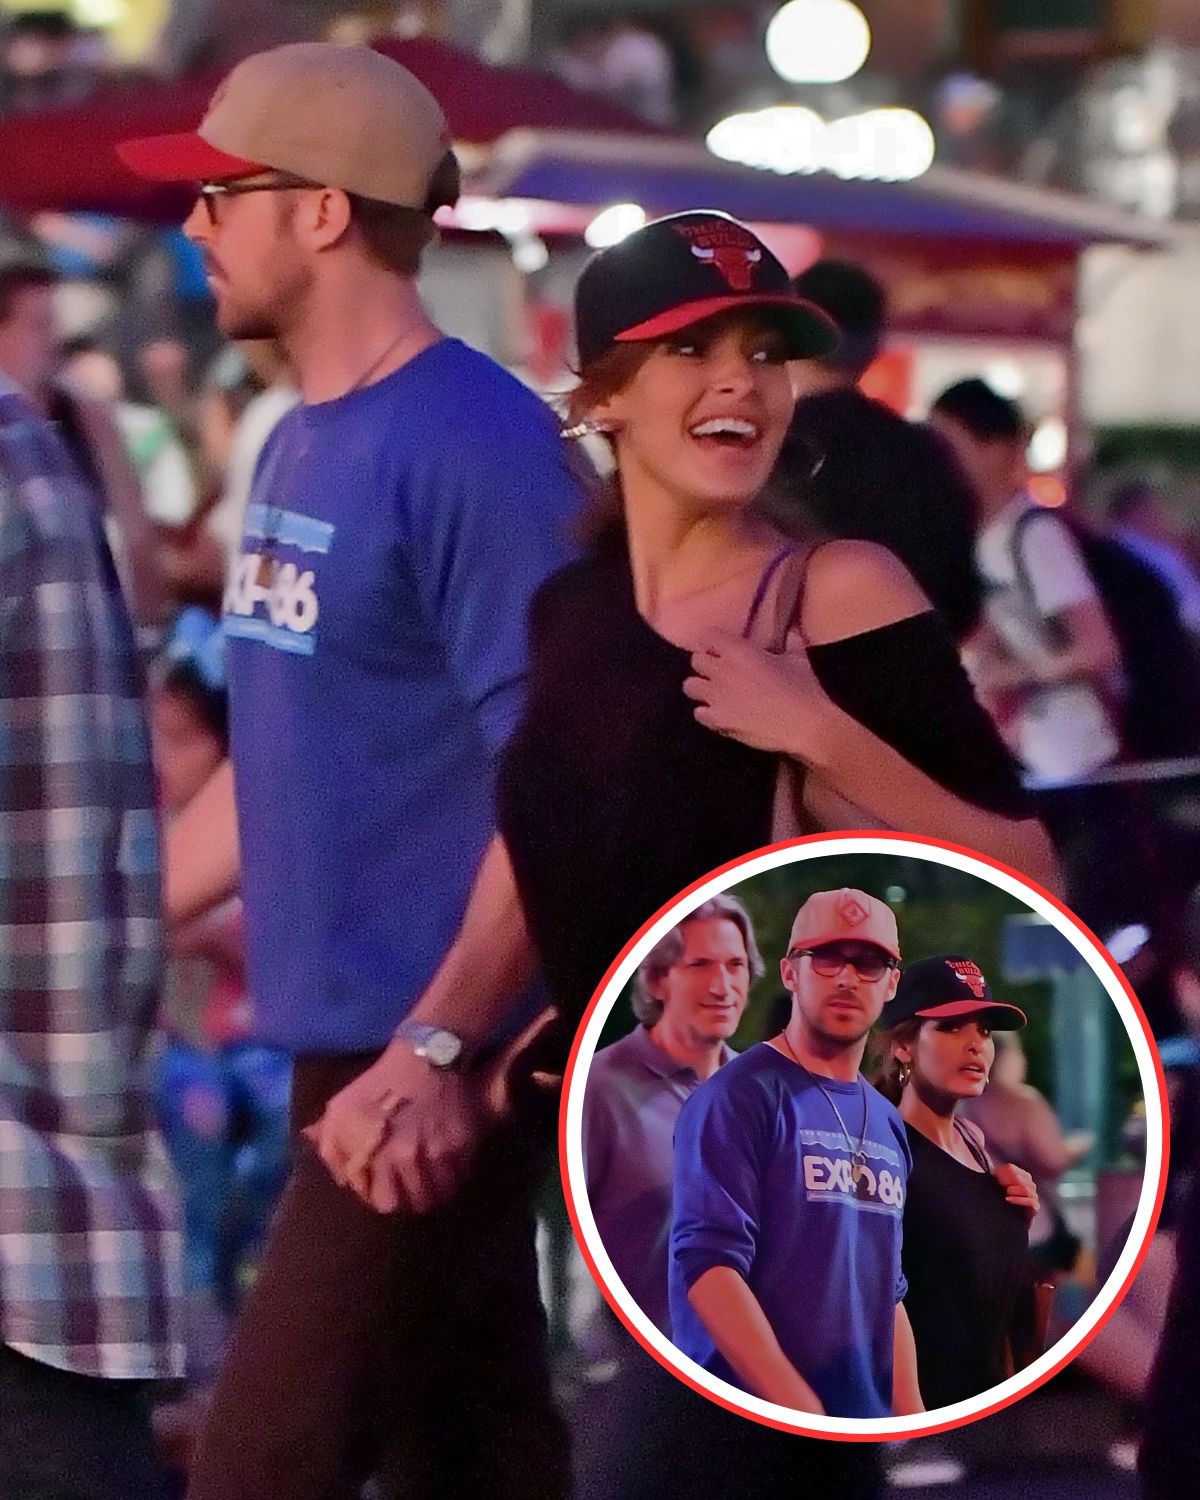 Cover Image for Ryan Gosling and Eva Mendes Show Rare PDA During Adorable Disneyland Date: Pics!